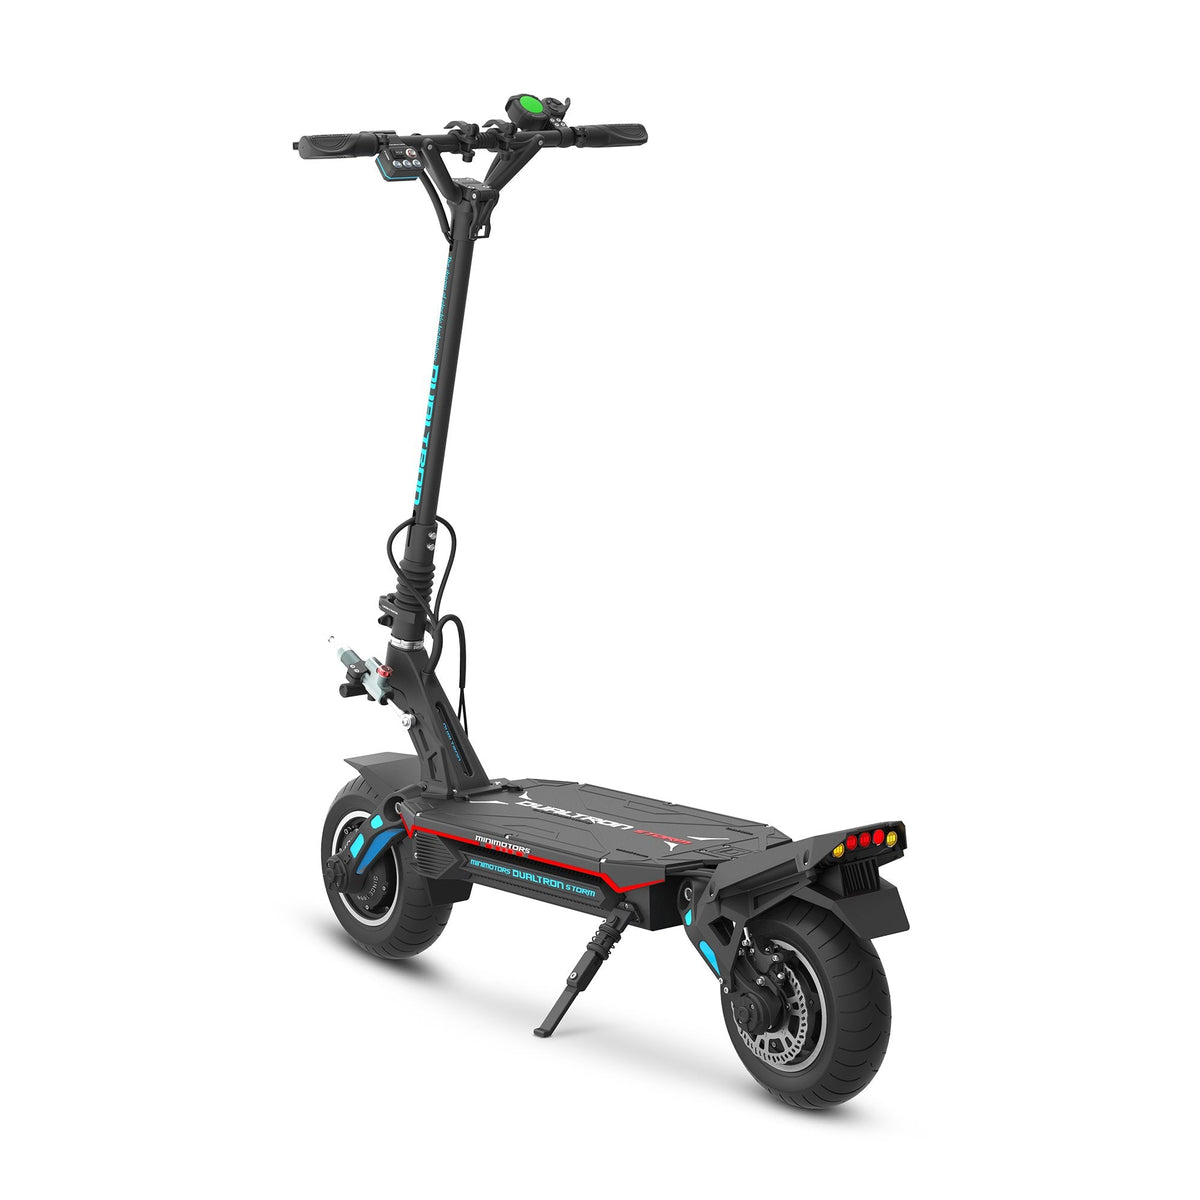 Dualtron Storm Ltd Electric Scooter rear side view